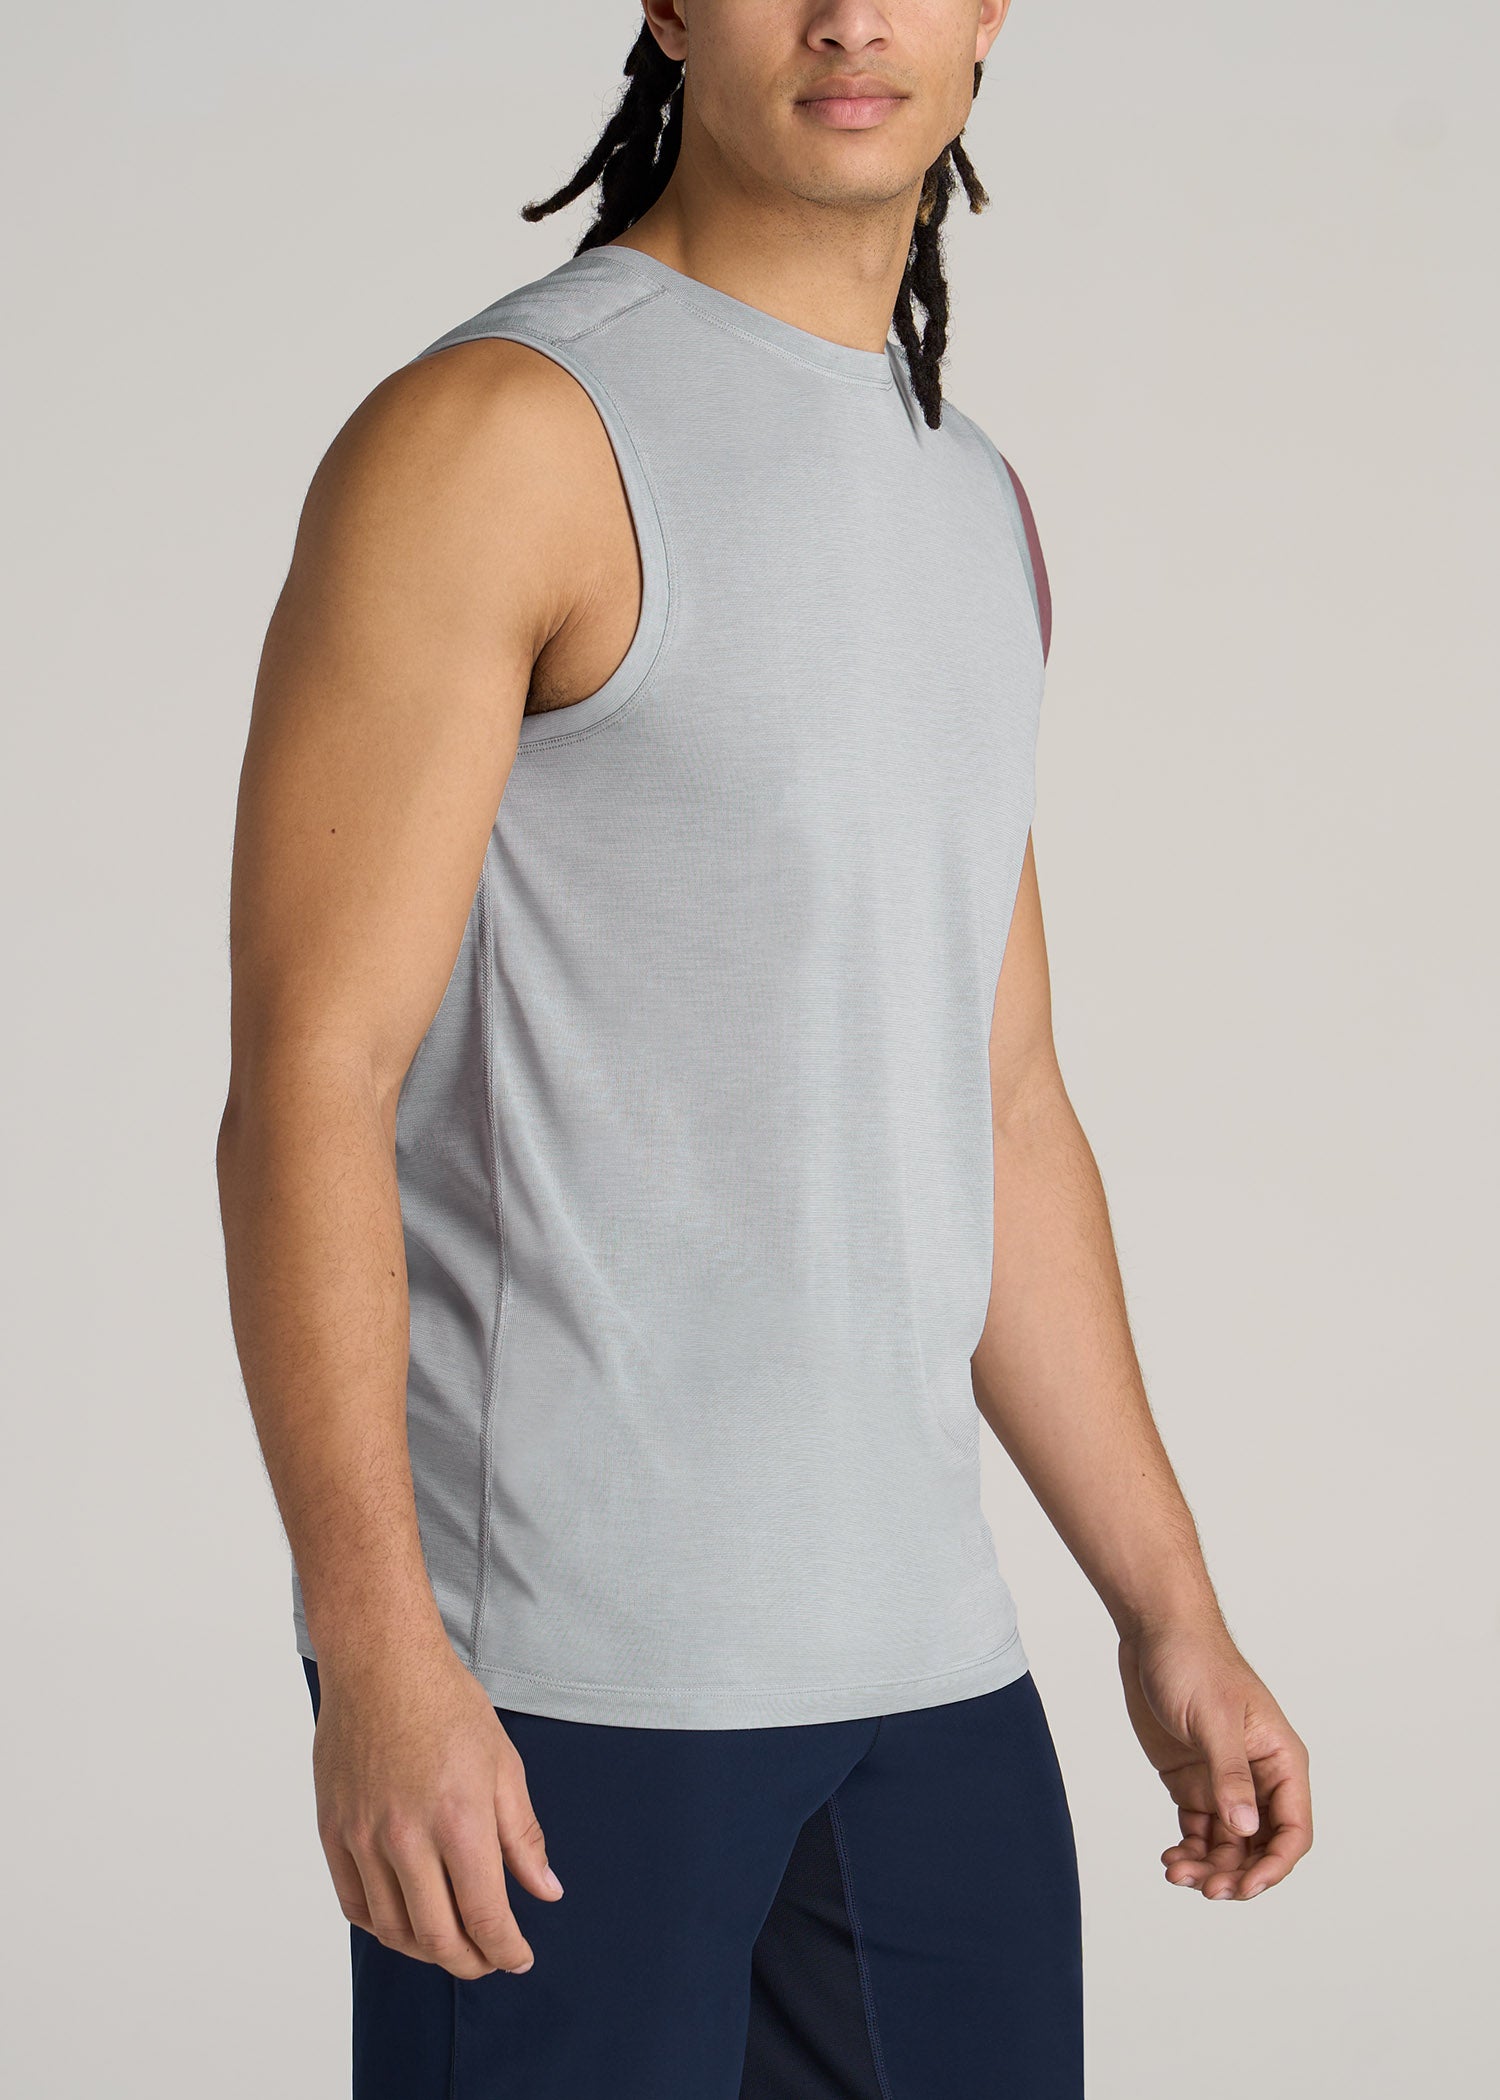 A.T. Performance MODERN-FIT Jersey Tank For Tall Men in Light Grey Mix